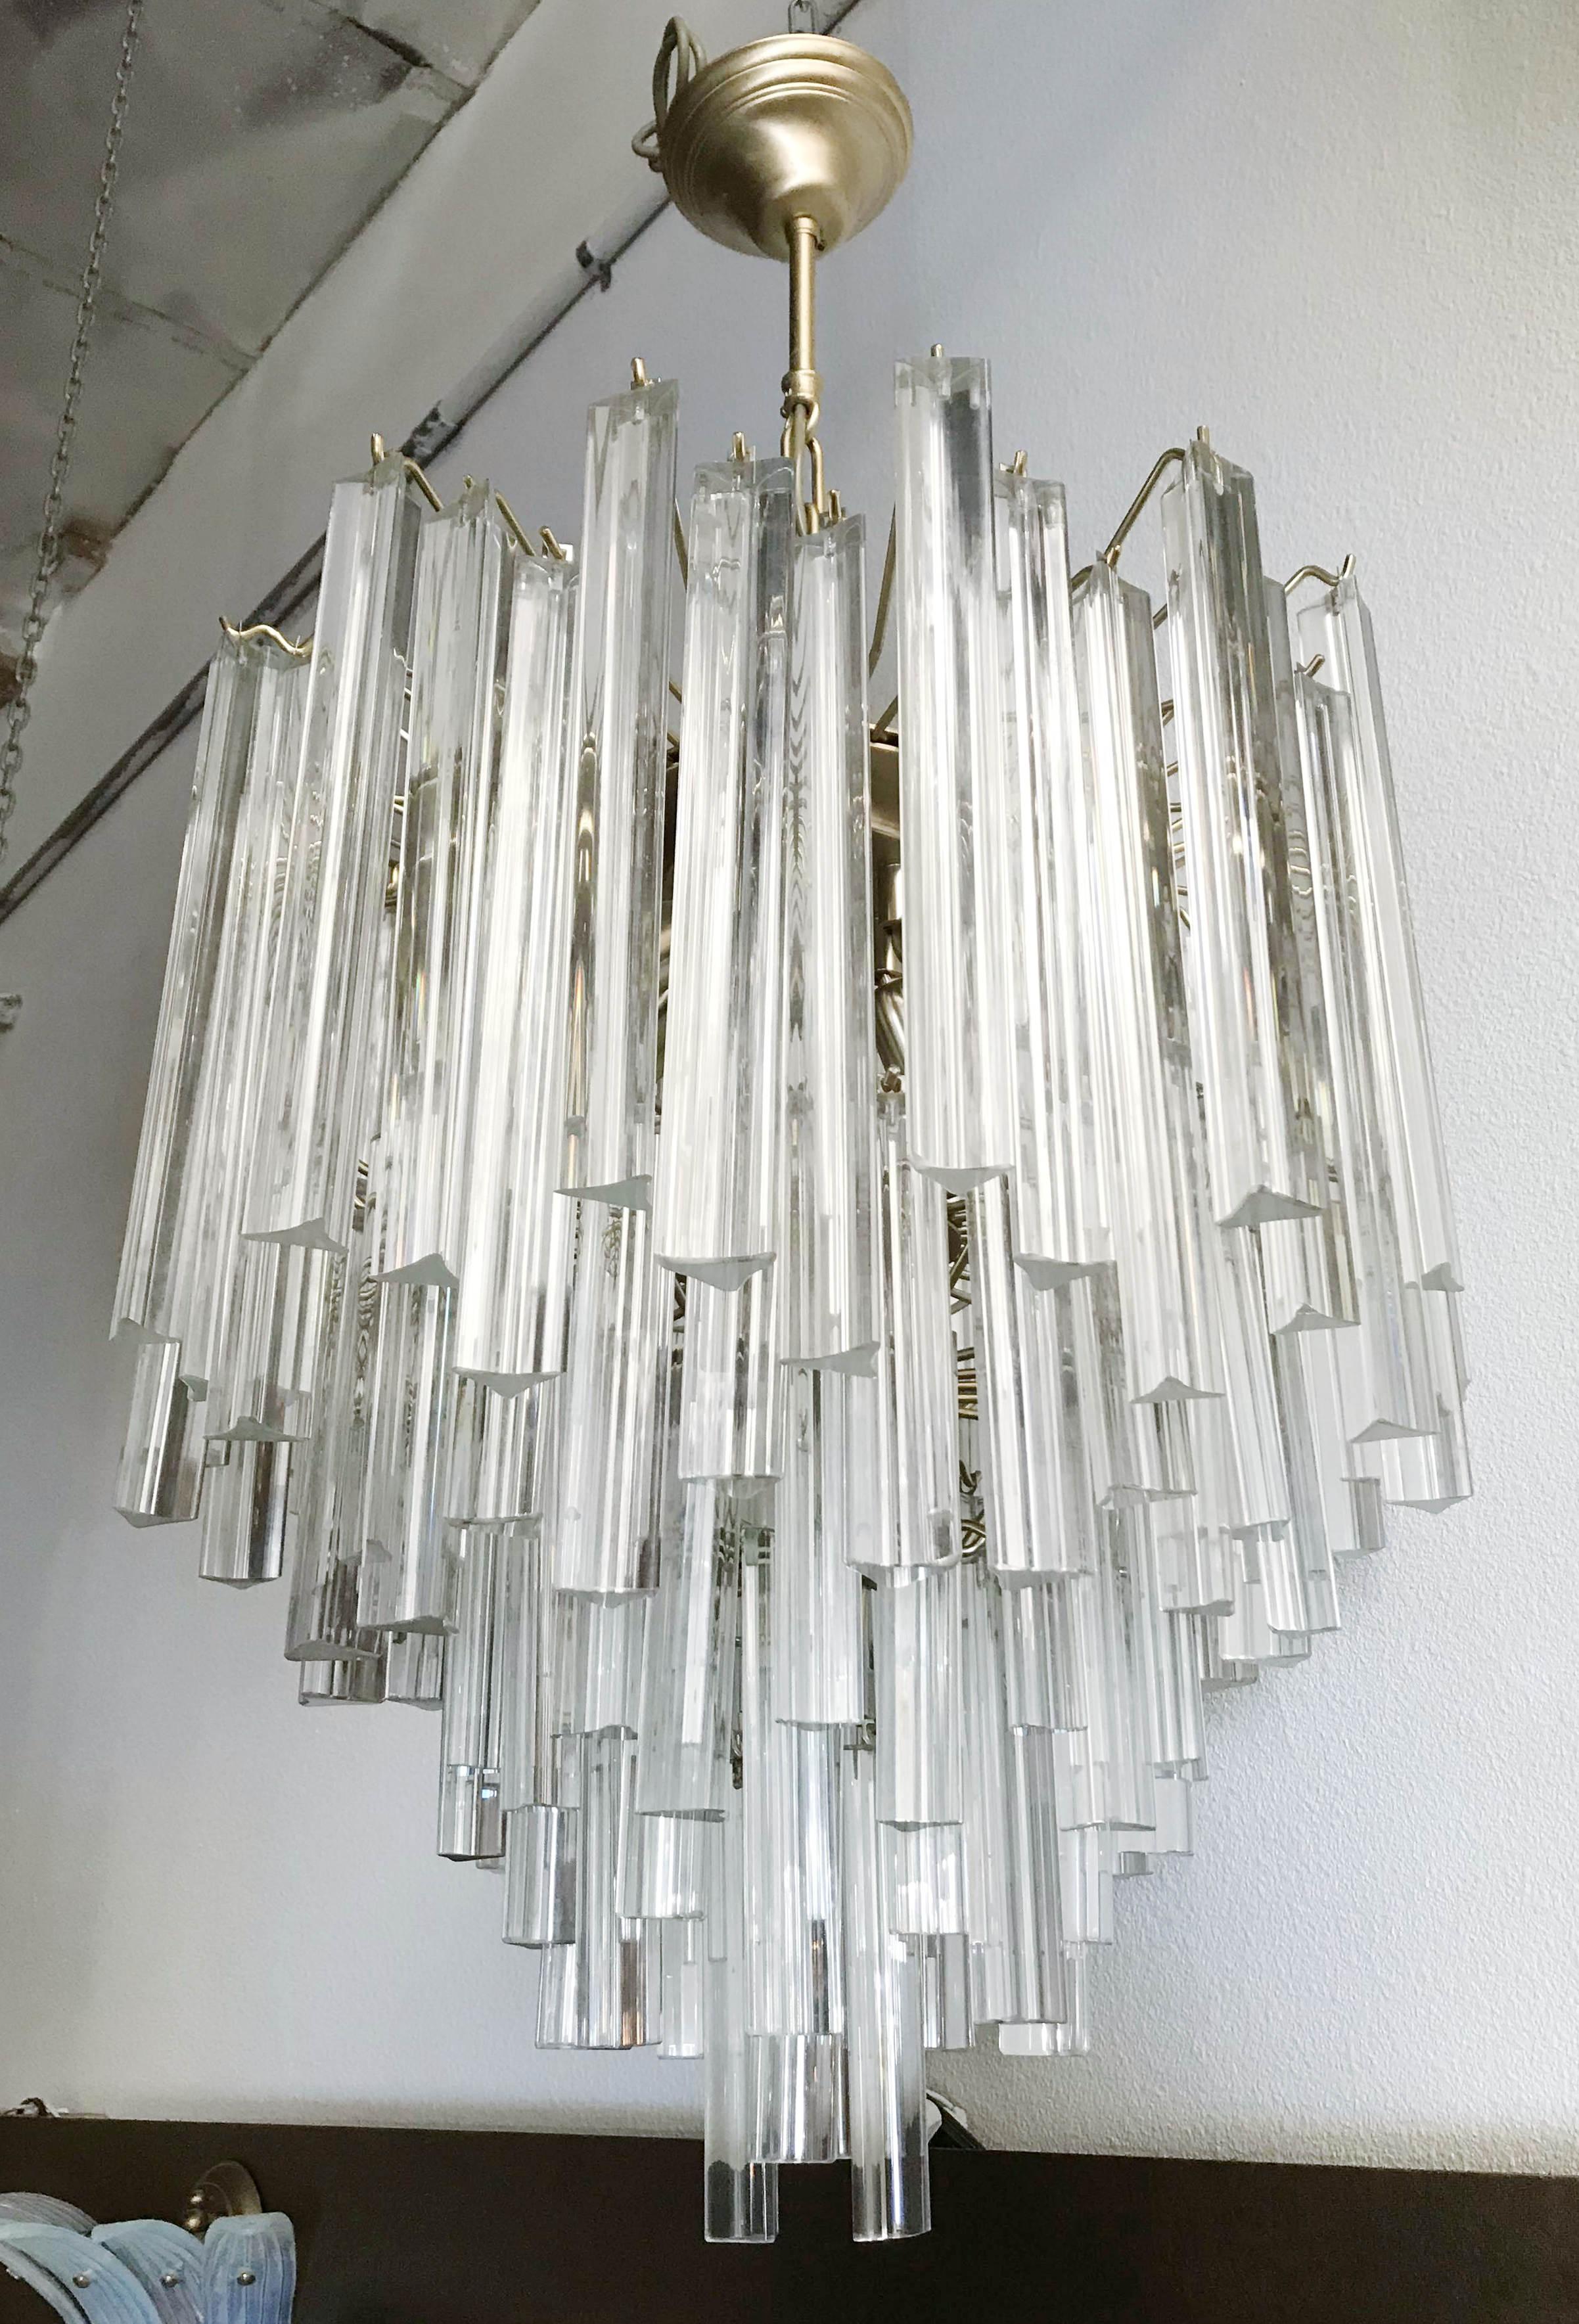 Vintage Italian chandelier with clear hand blown Murano triedri glass crystals mounted on painted brass frame, designed by Venini, circa 1960s, made in Italy
6 lights / E12 type / max 40W each
Measures: Diameter 21 inches, height 23 inches plus